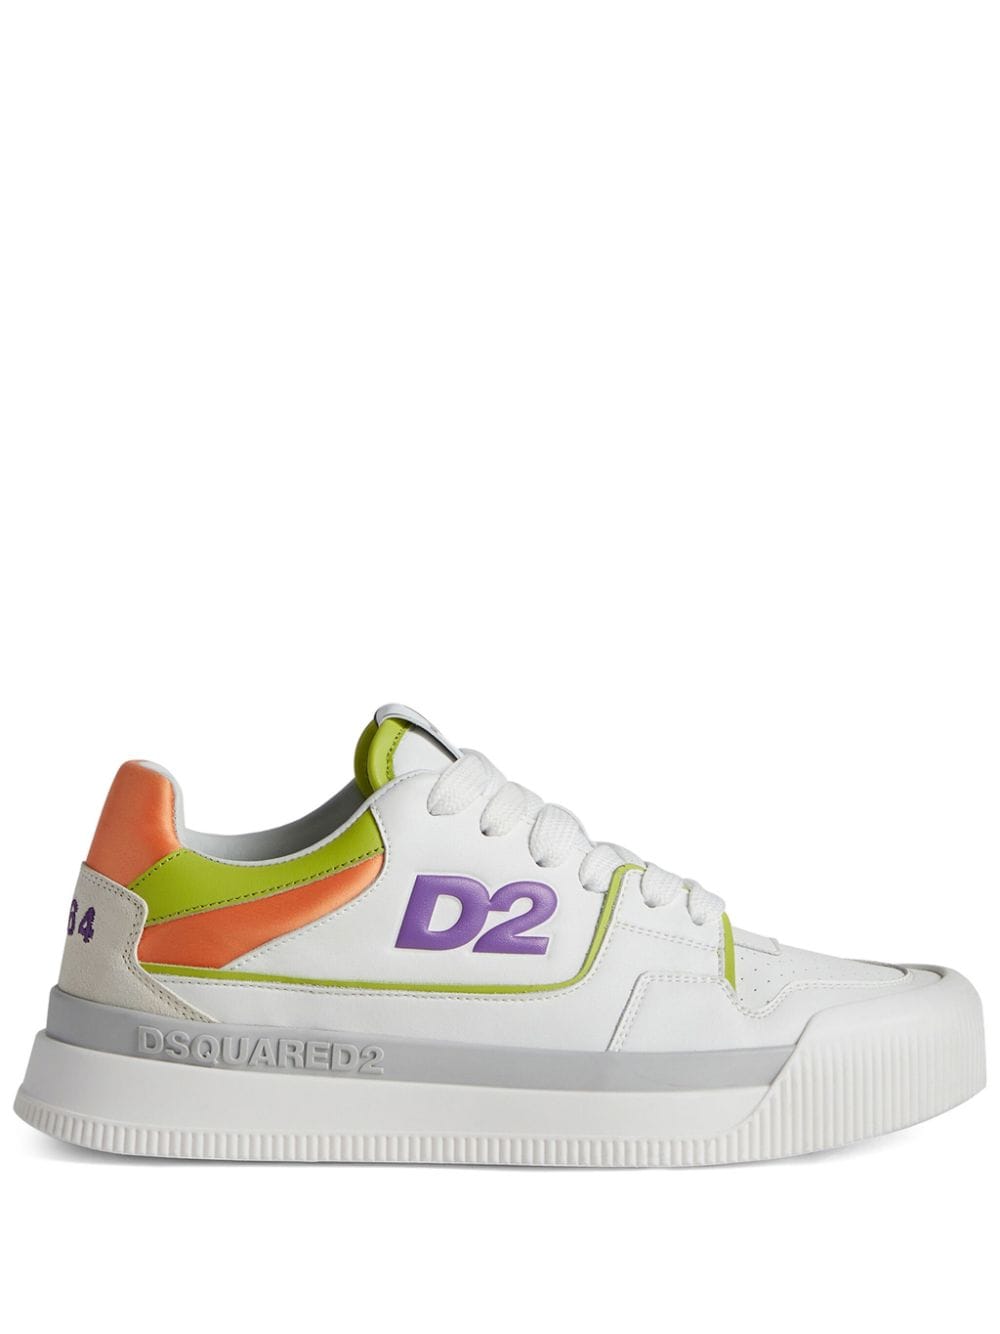 Dsquared2 logo-embossed leather sneakers - White von Dsquared2